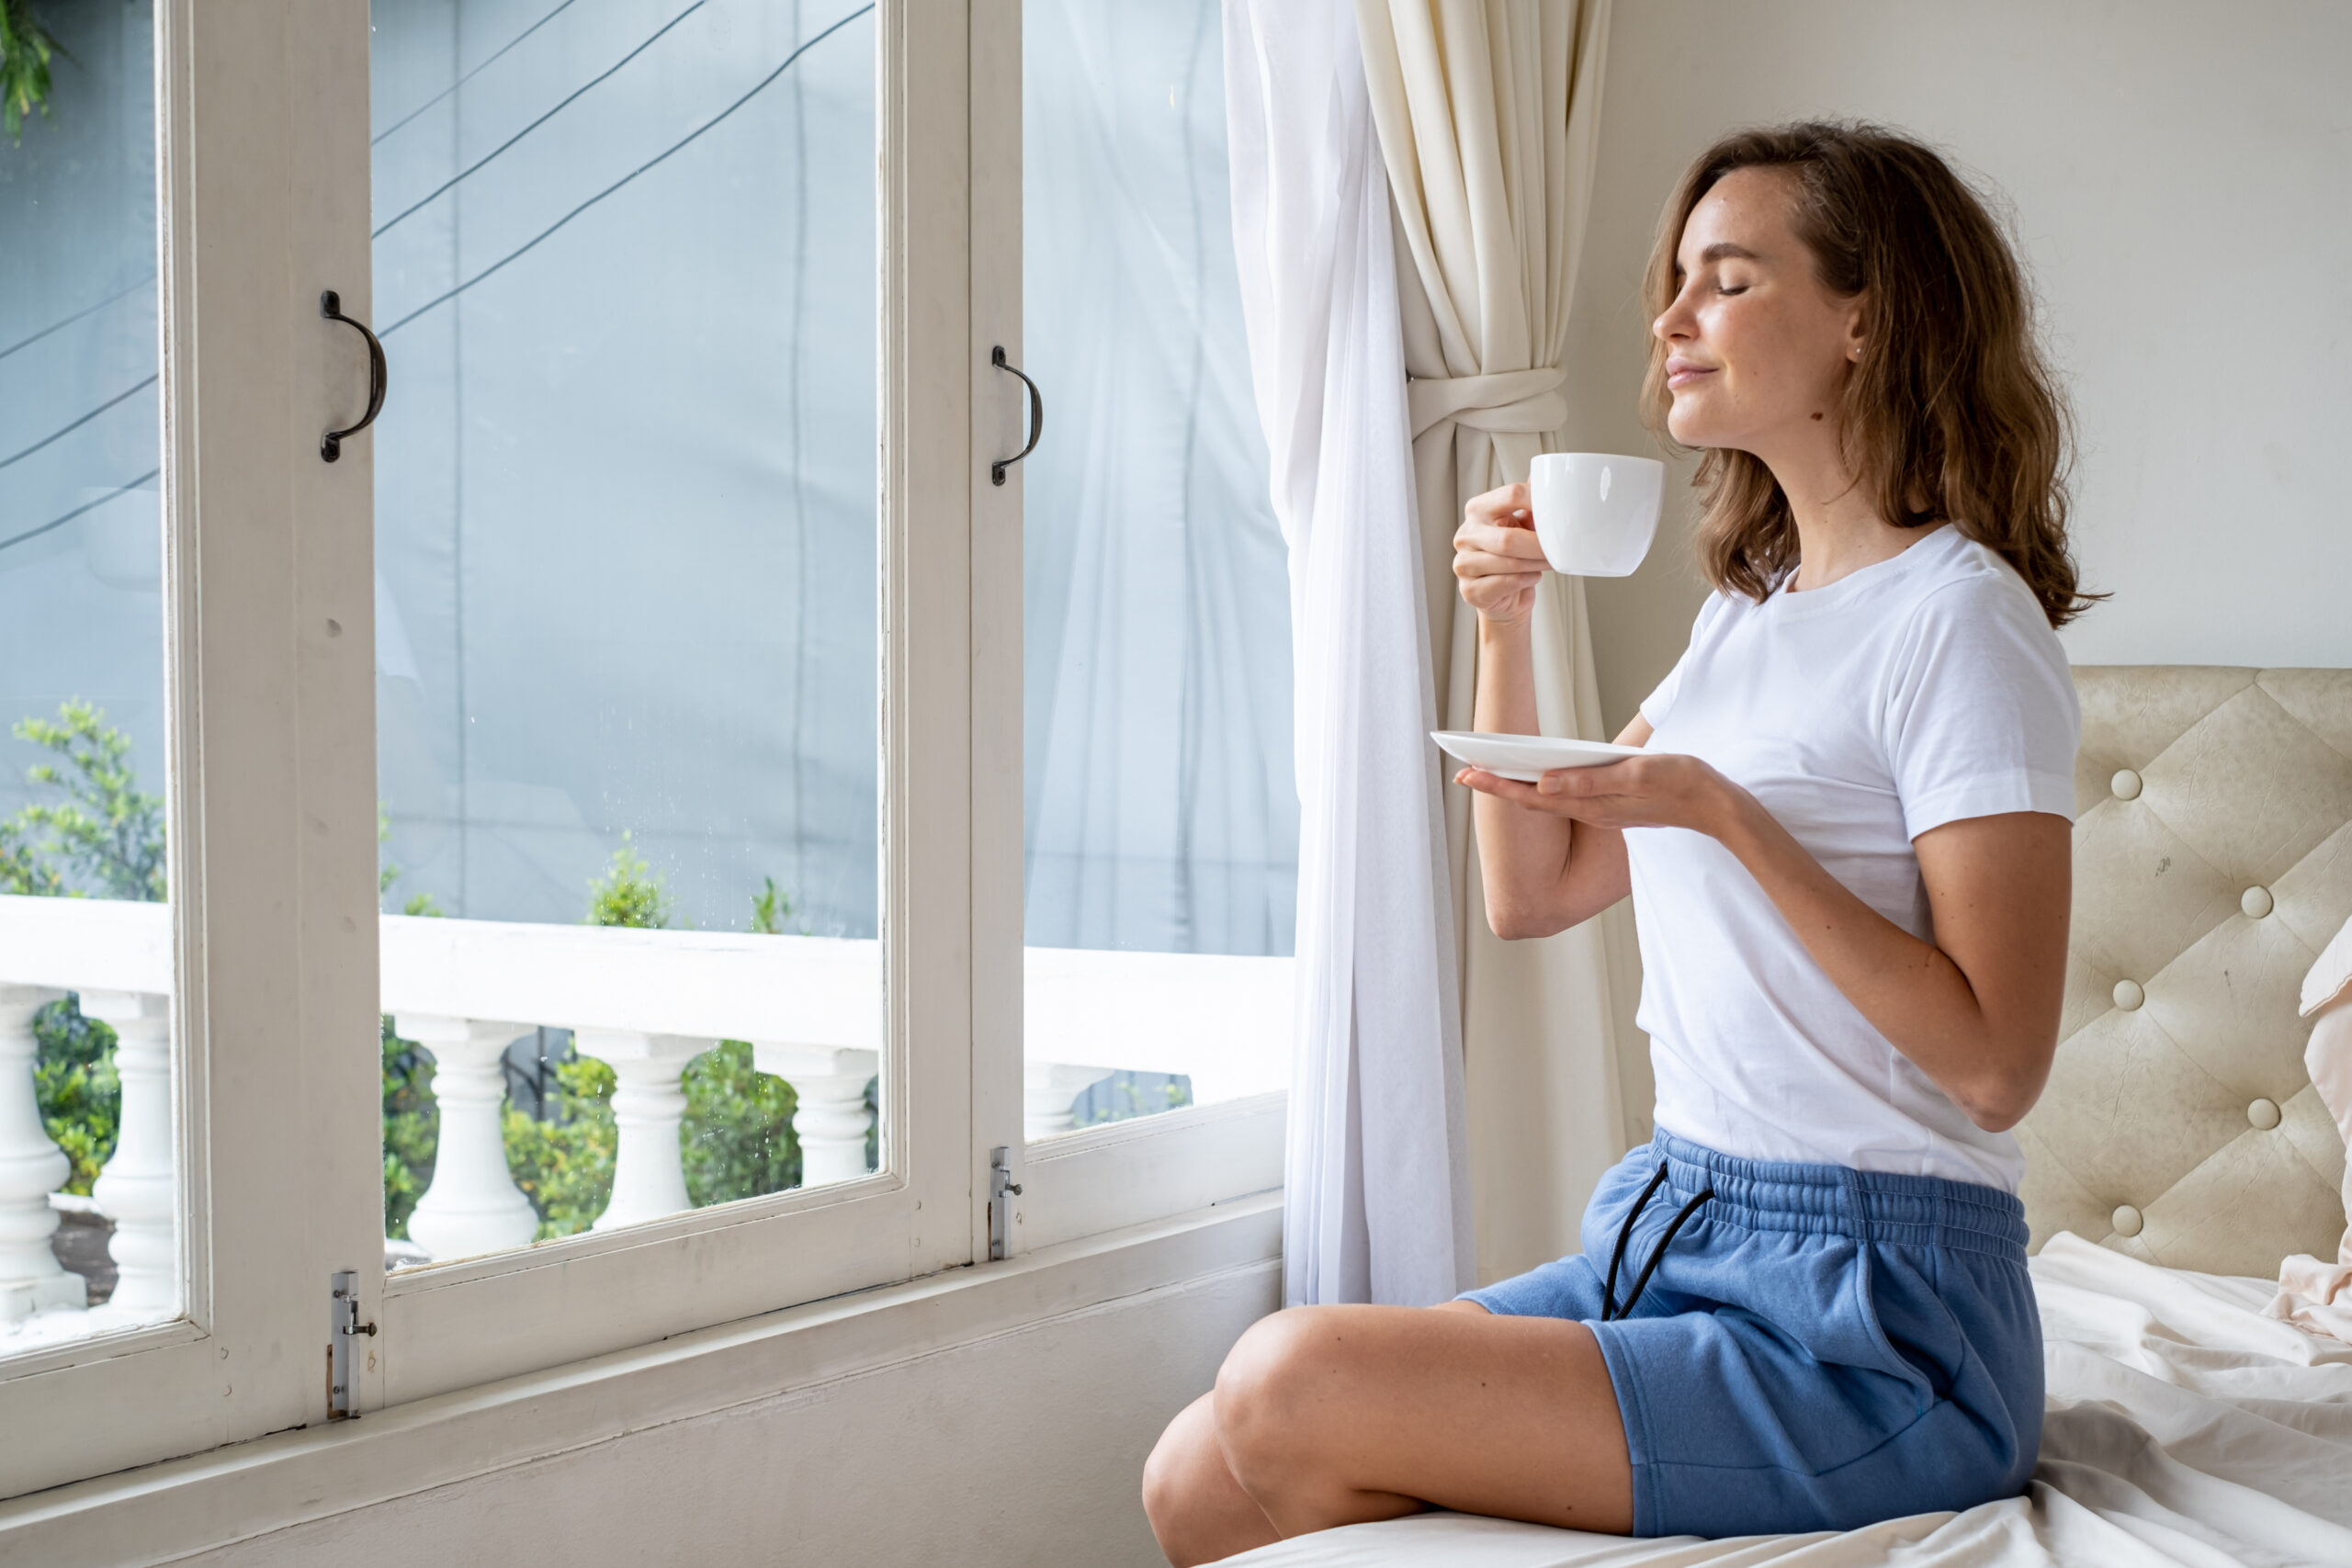 A woman is drinking coffee while sitting on the bed in her bedroom at home and relaxing in front of the windows.